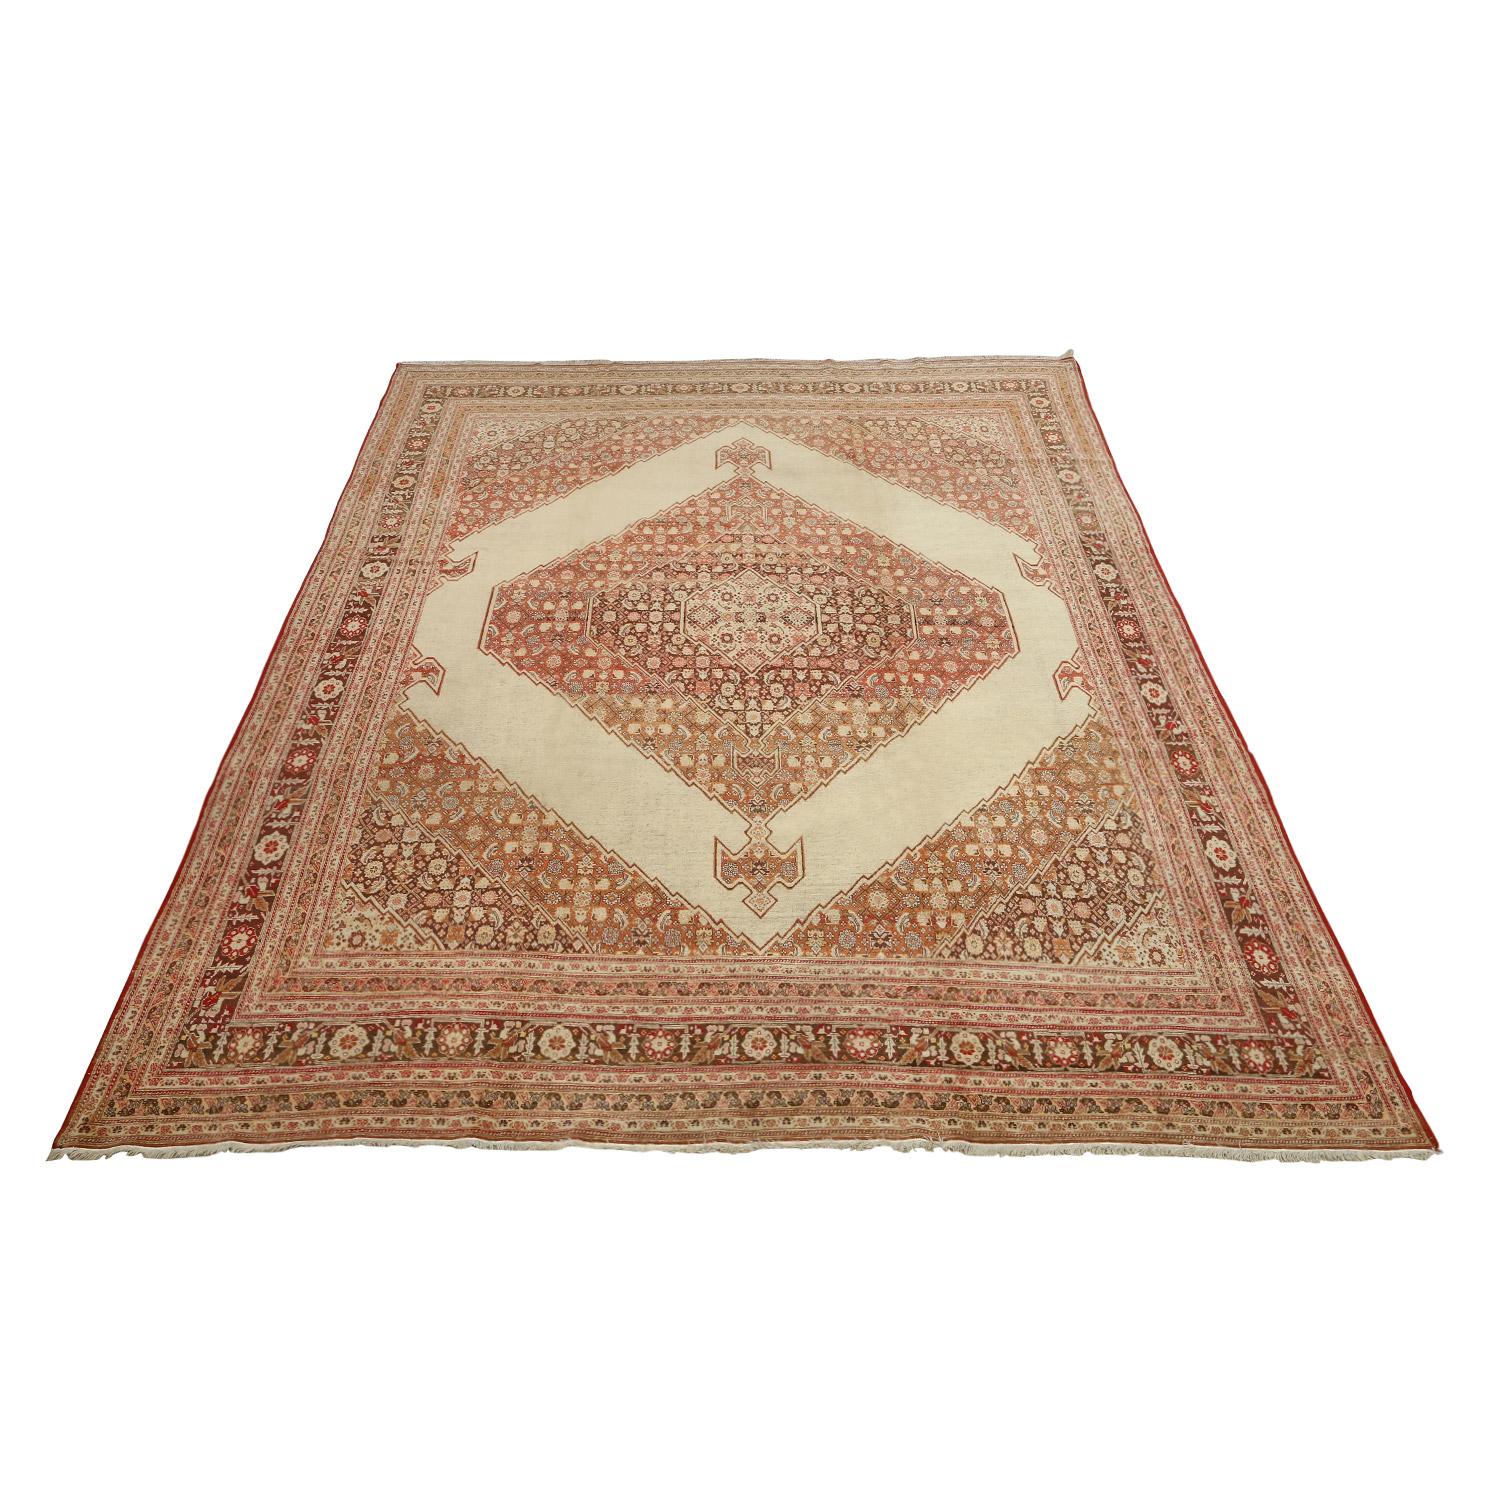 This Antique Tabriz Rug featuring a Center Medallion Design is a captivating testament to the rich tradition of Persian craftsmanship and artistry. Hailing from the esteemed weaving city of Tabriz, these rugs are renowned for their intricate